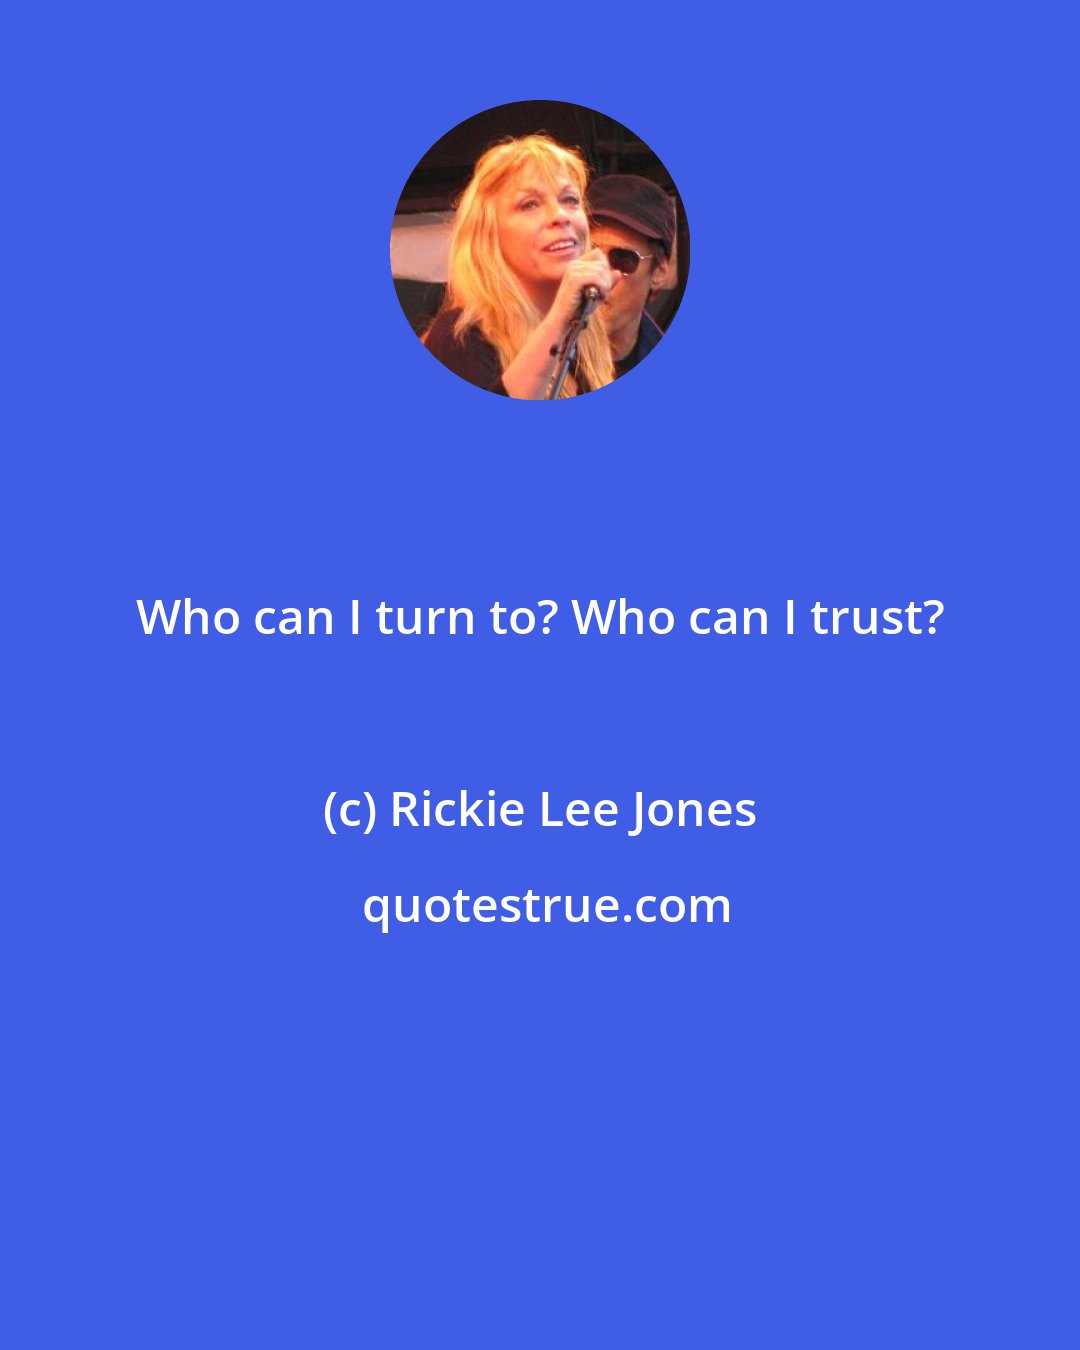 Rickie Lee Jones: Who can I turn to? Who can I trust?